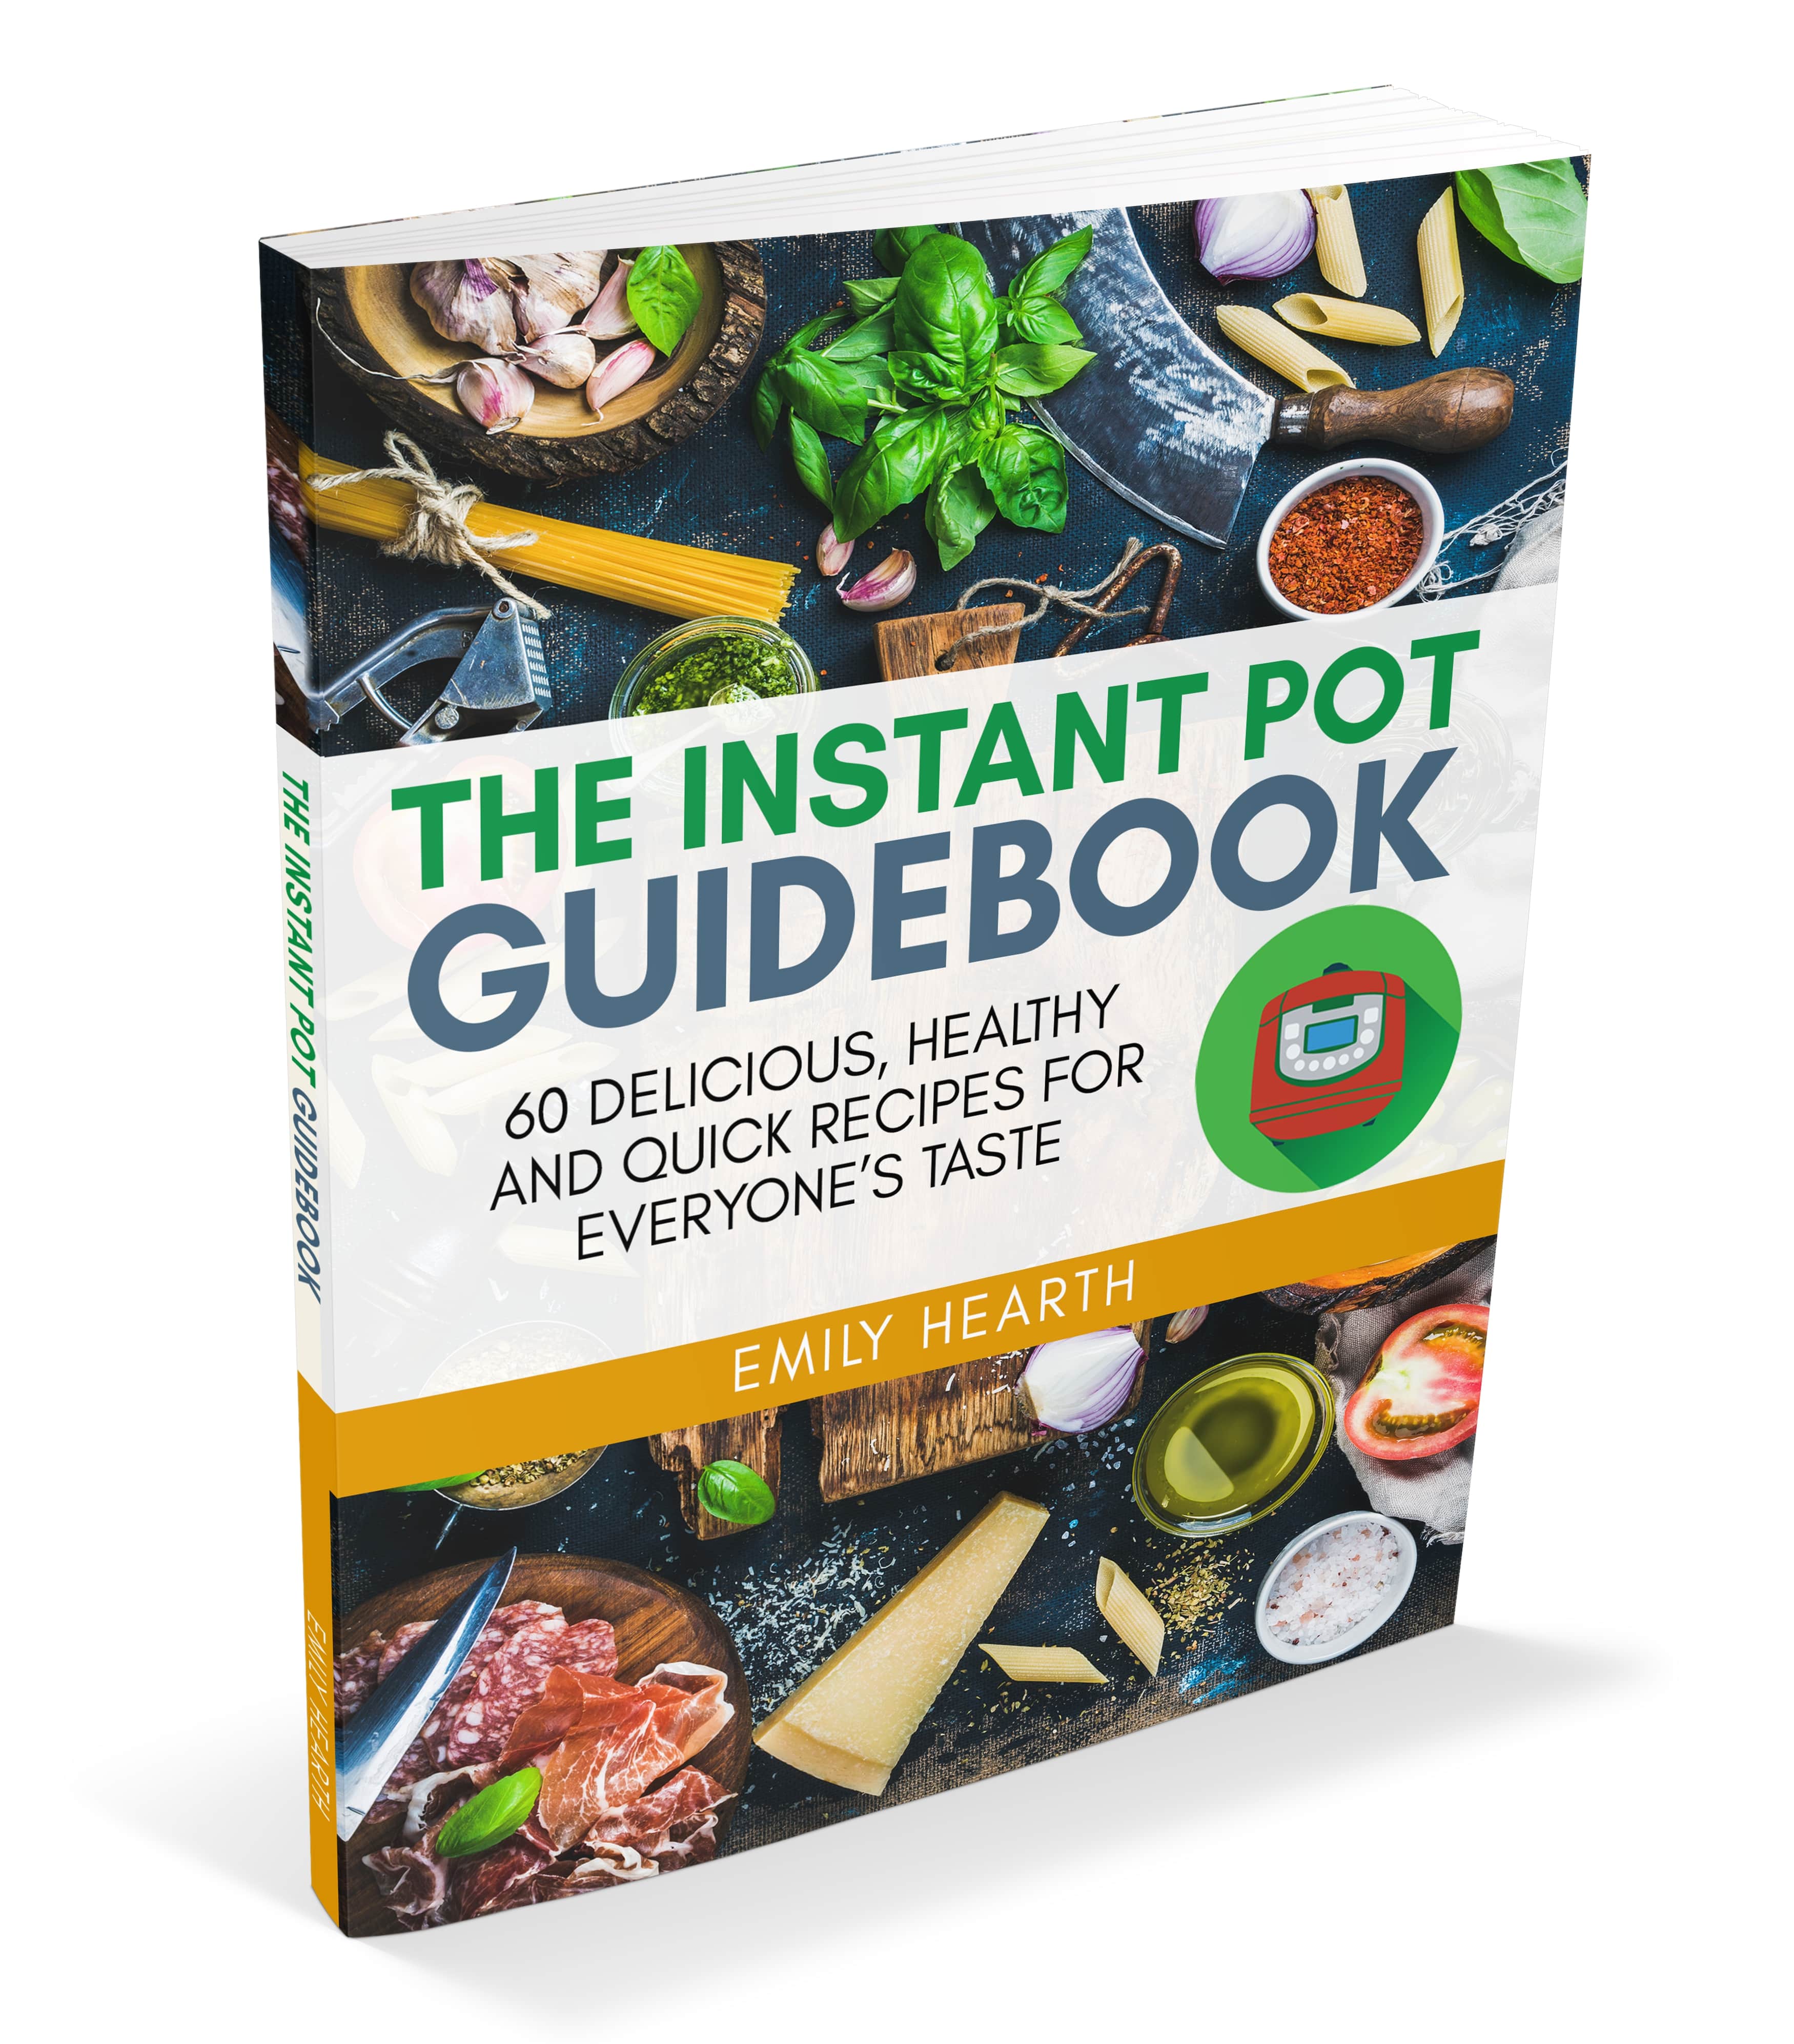 FREE: The Instant Pot Guidebook by Emily Hearth